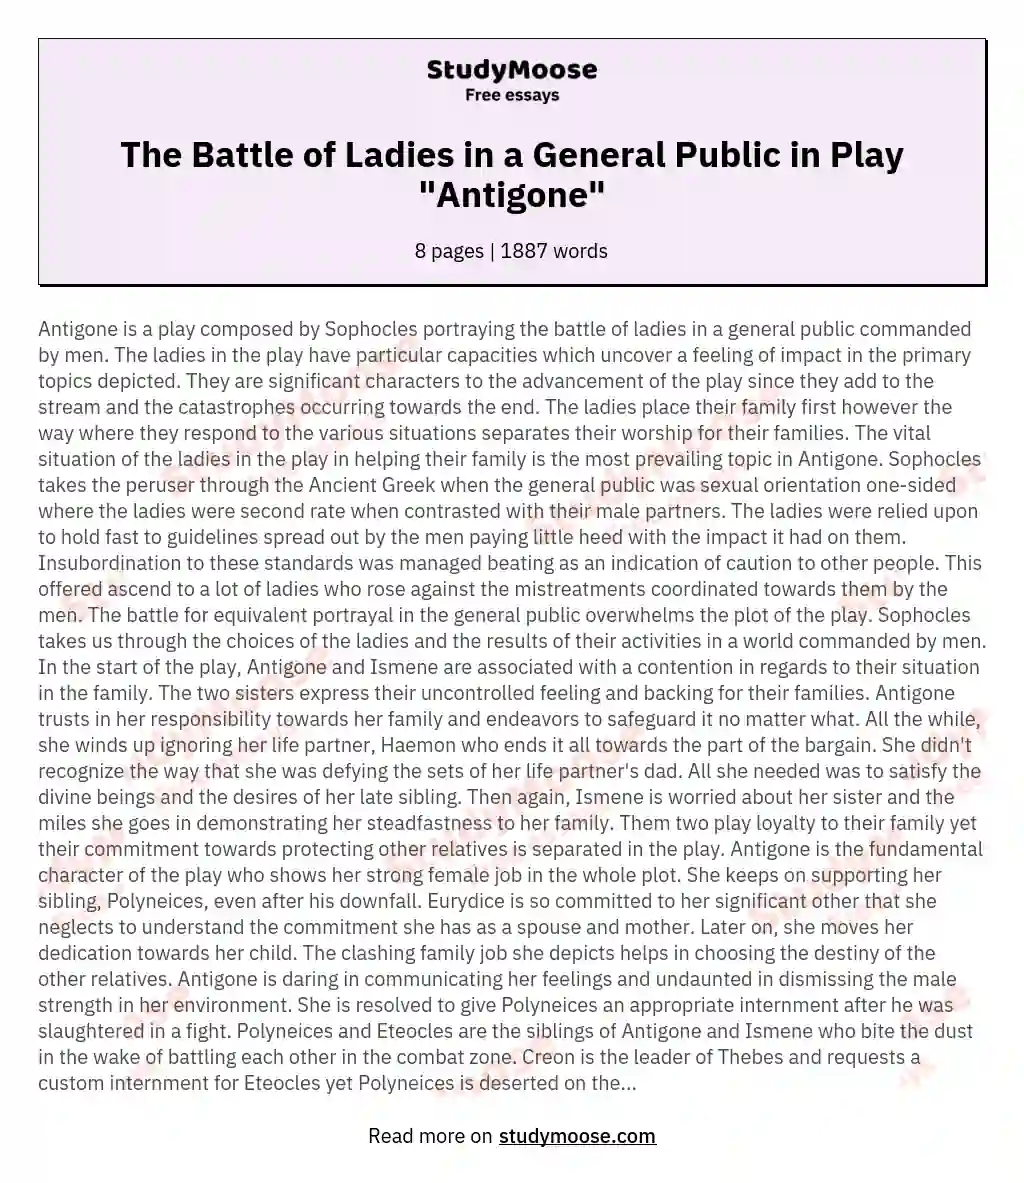 The Battle of Ladies in a General Public in Play "Antigone" essay